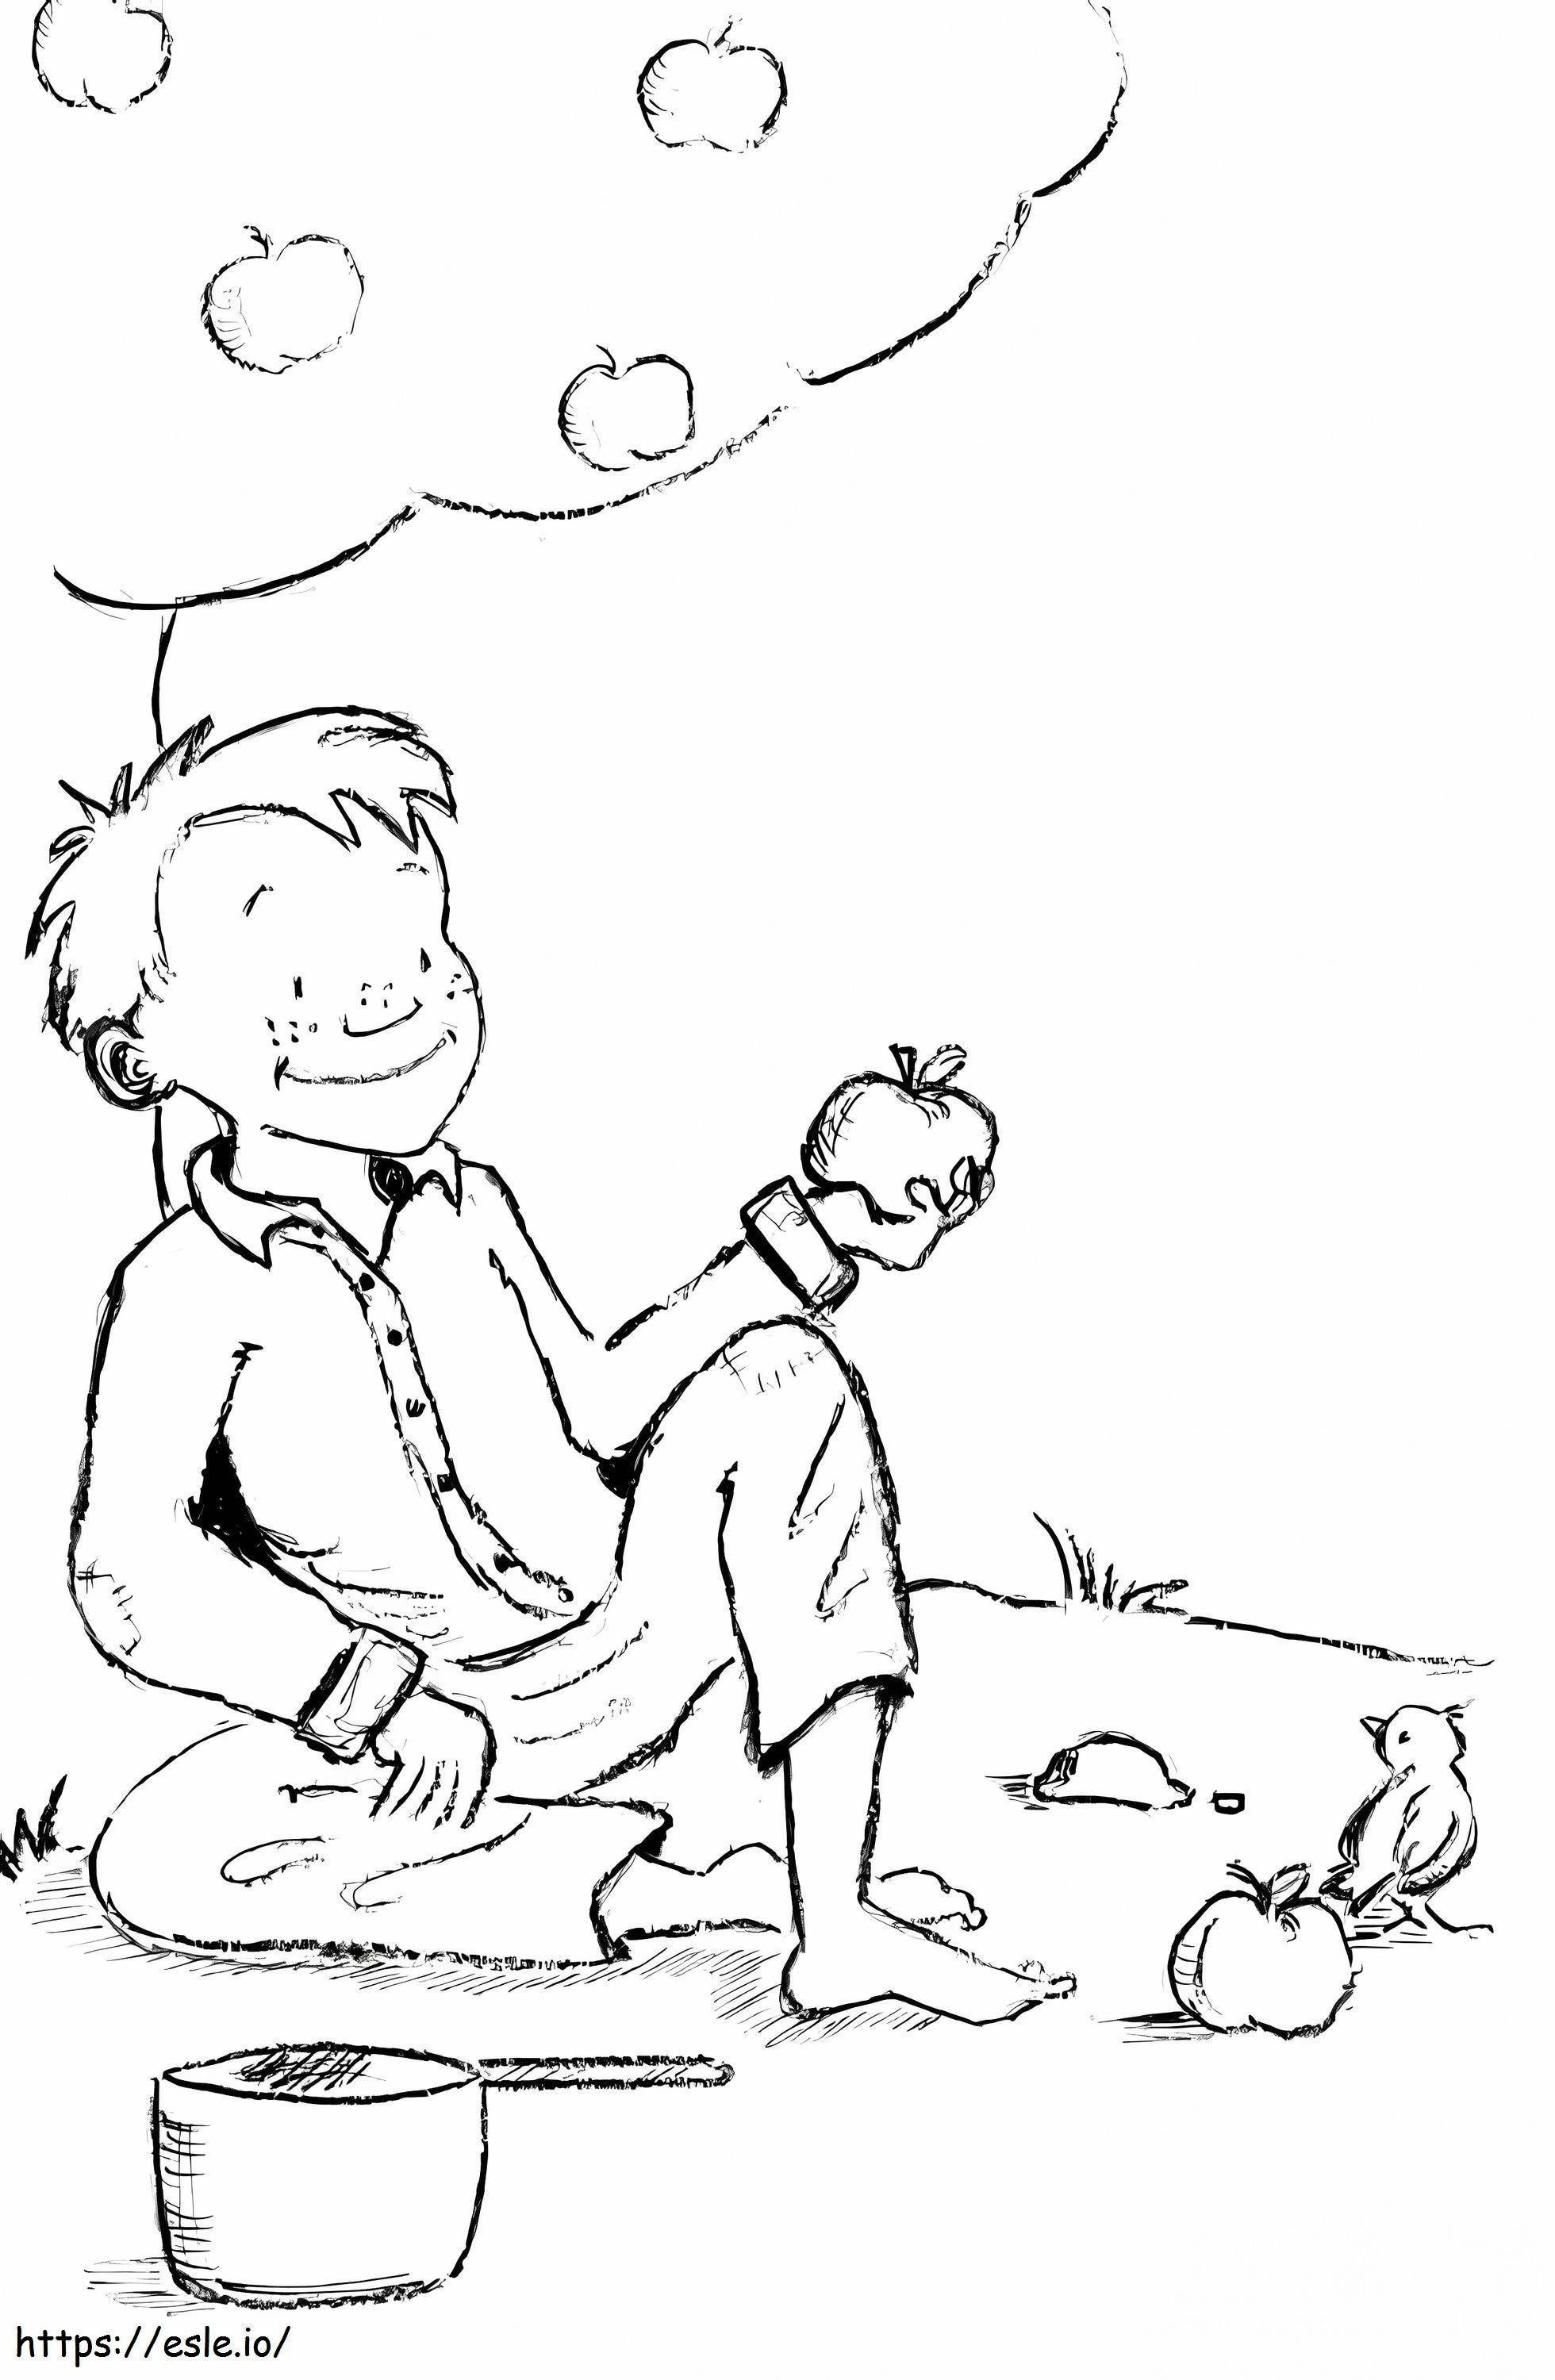 Young Johnny Appleseed coloring page